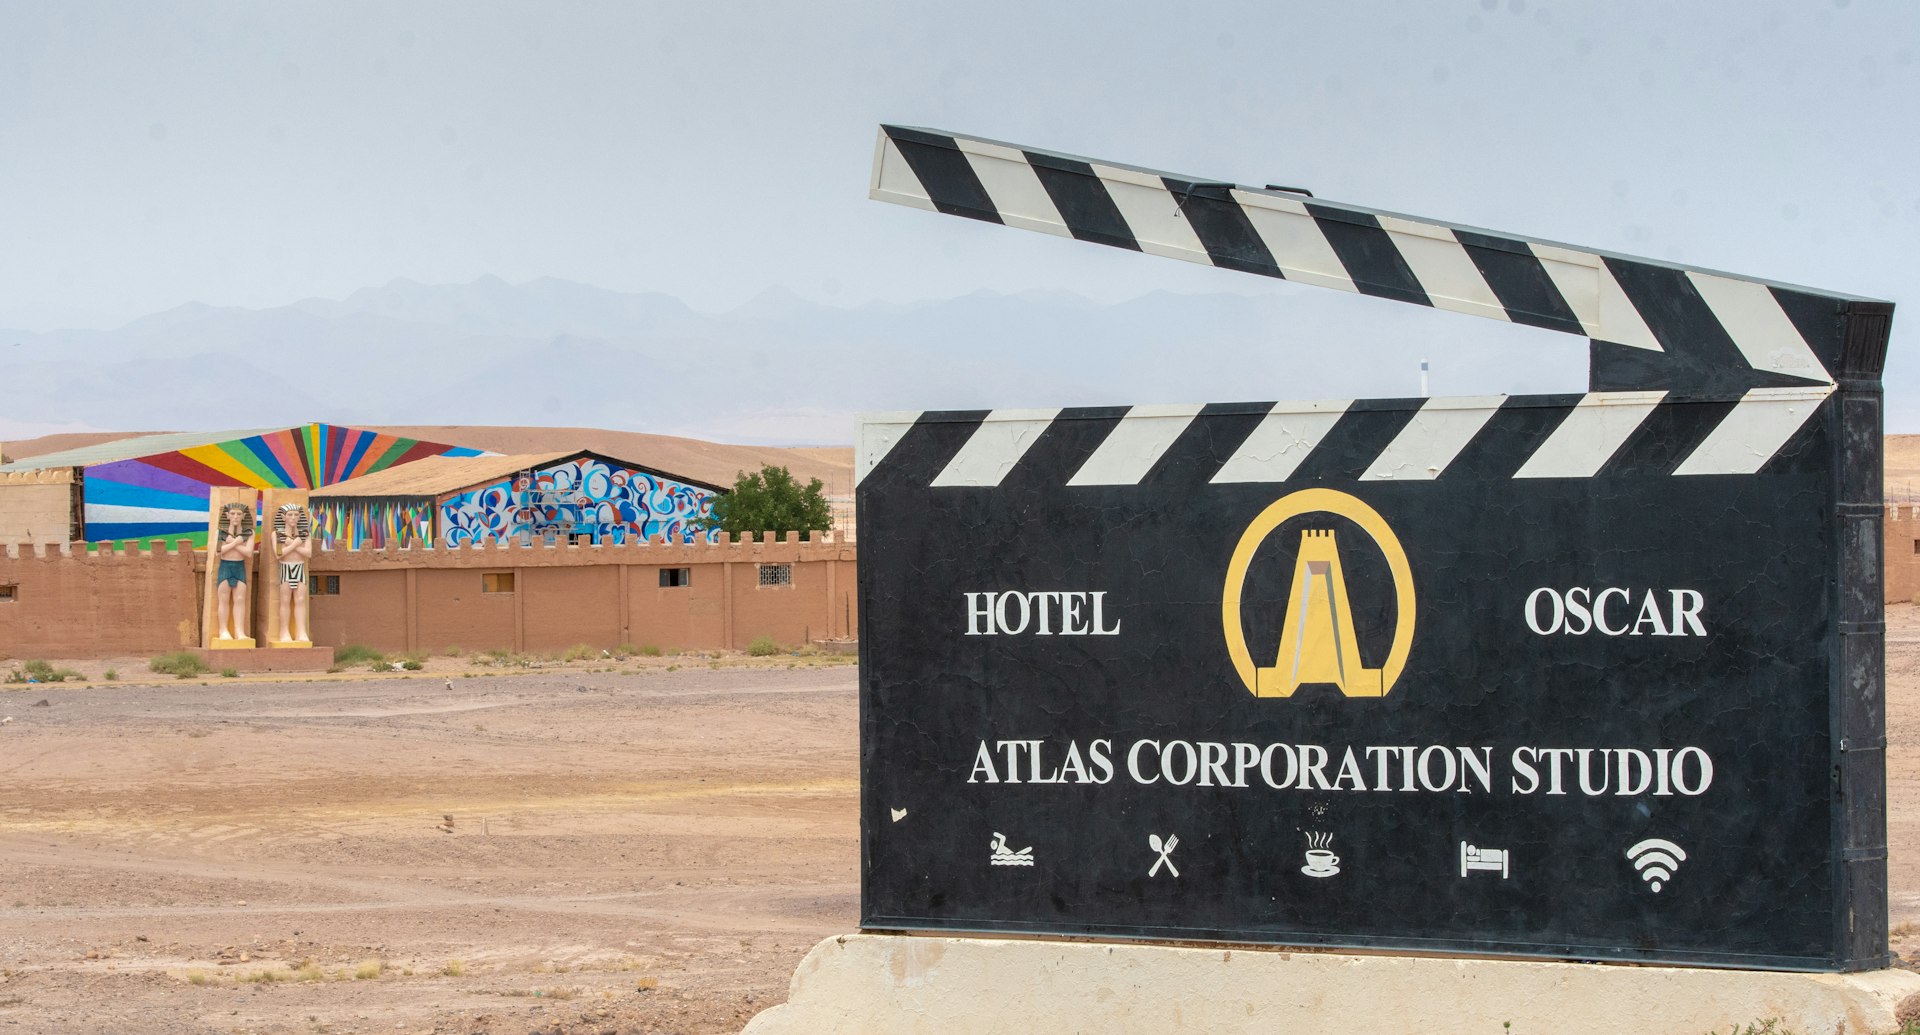 The entrance to Atlas Studios in Morocco looks like a large black clap board with a stylized illustration of a golden tower like those seen at nearby Ait Ben Haddou. Behind the sign is a crenelated wall, Egyptian style statues, and a rainbow sunburst mural  